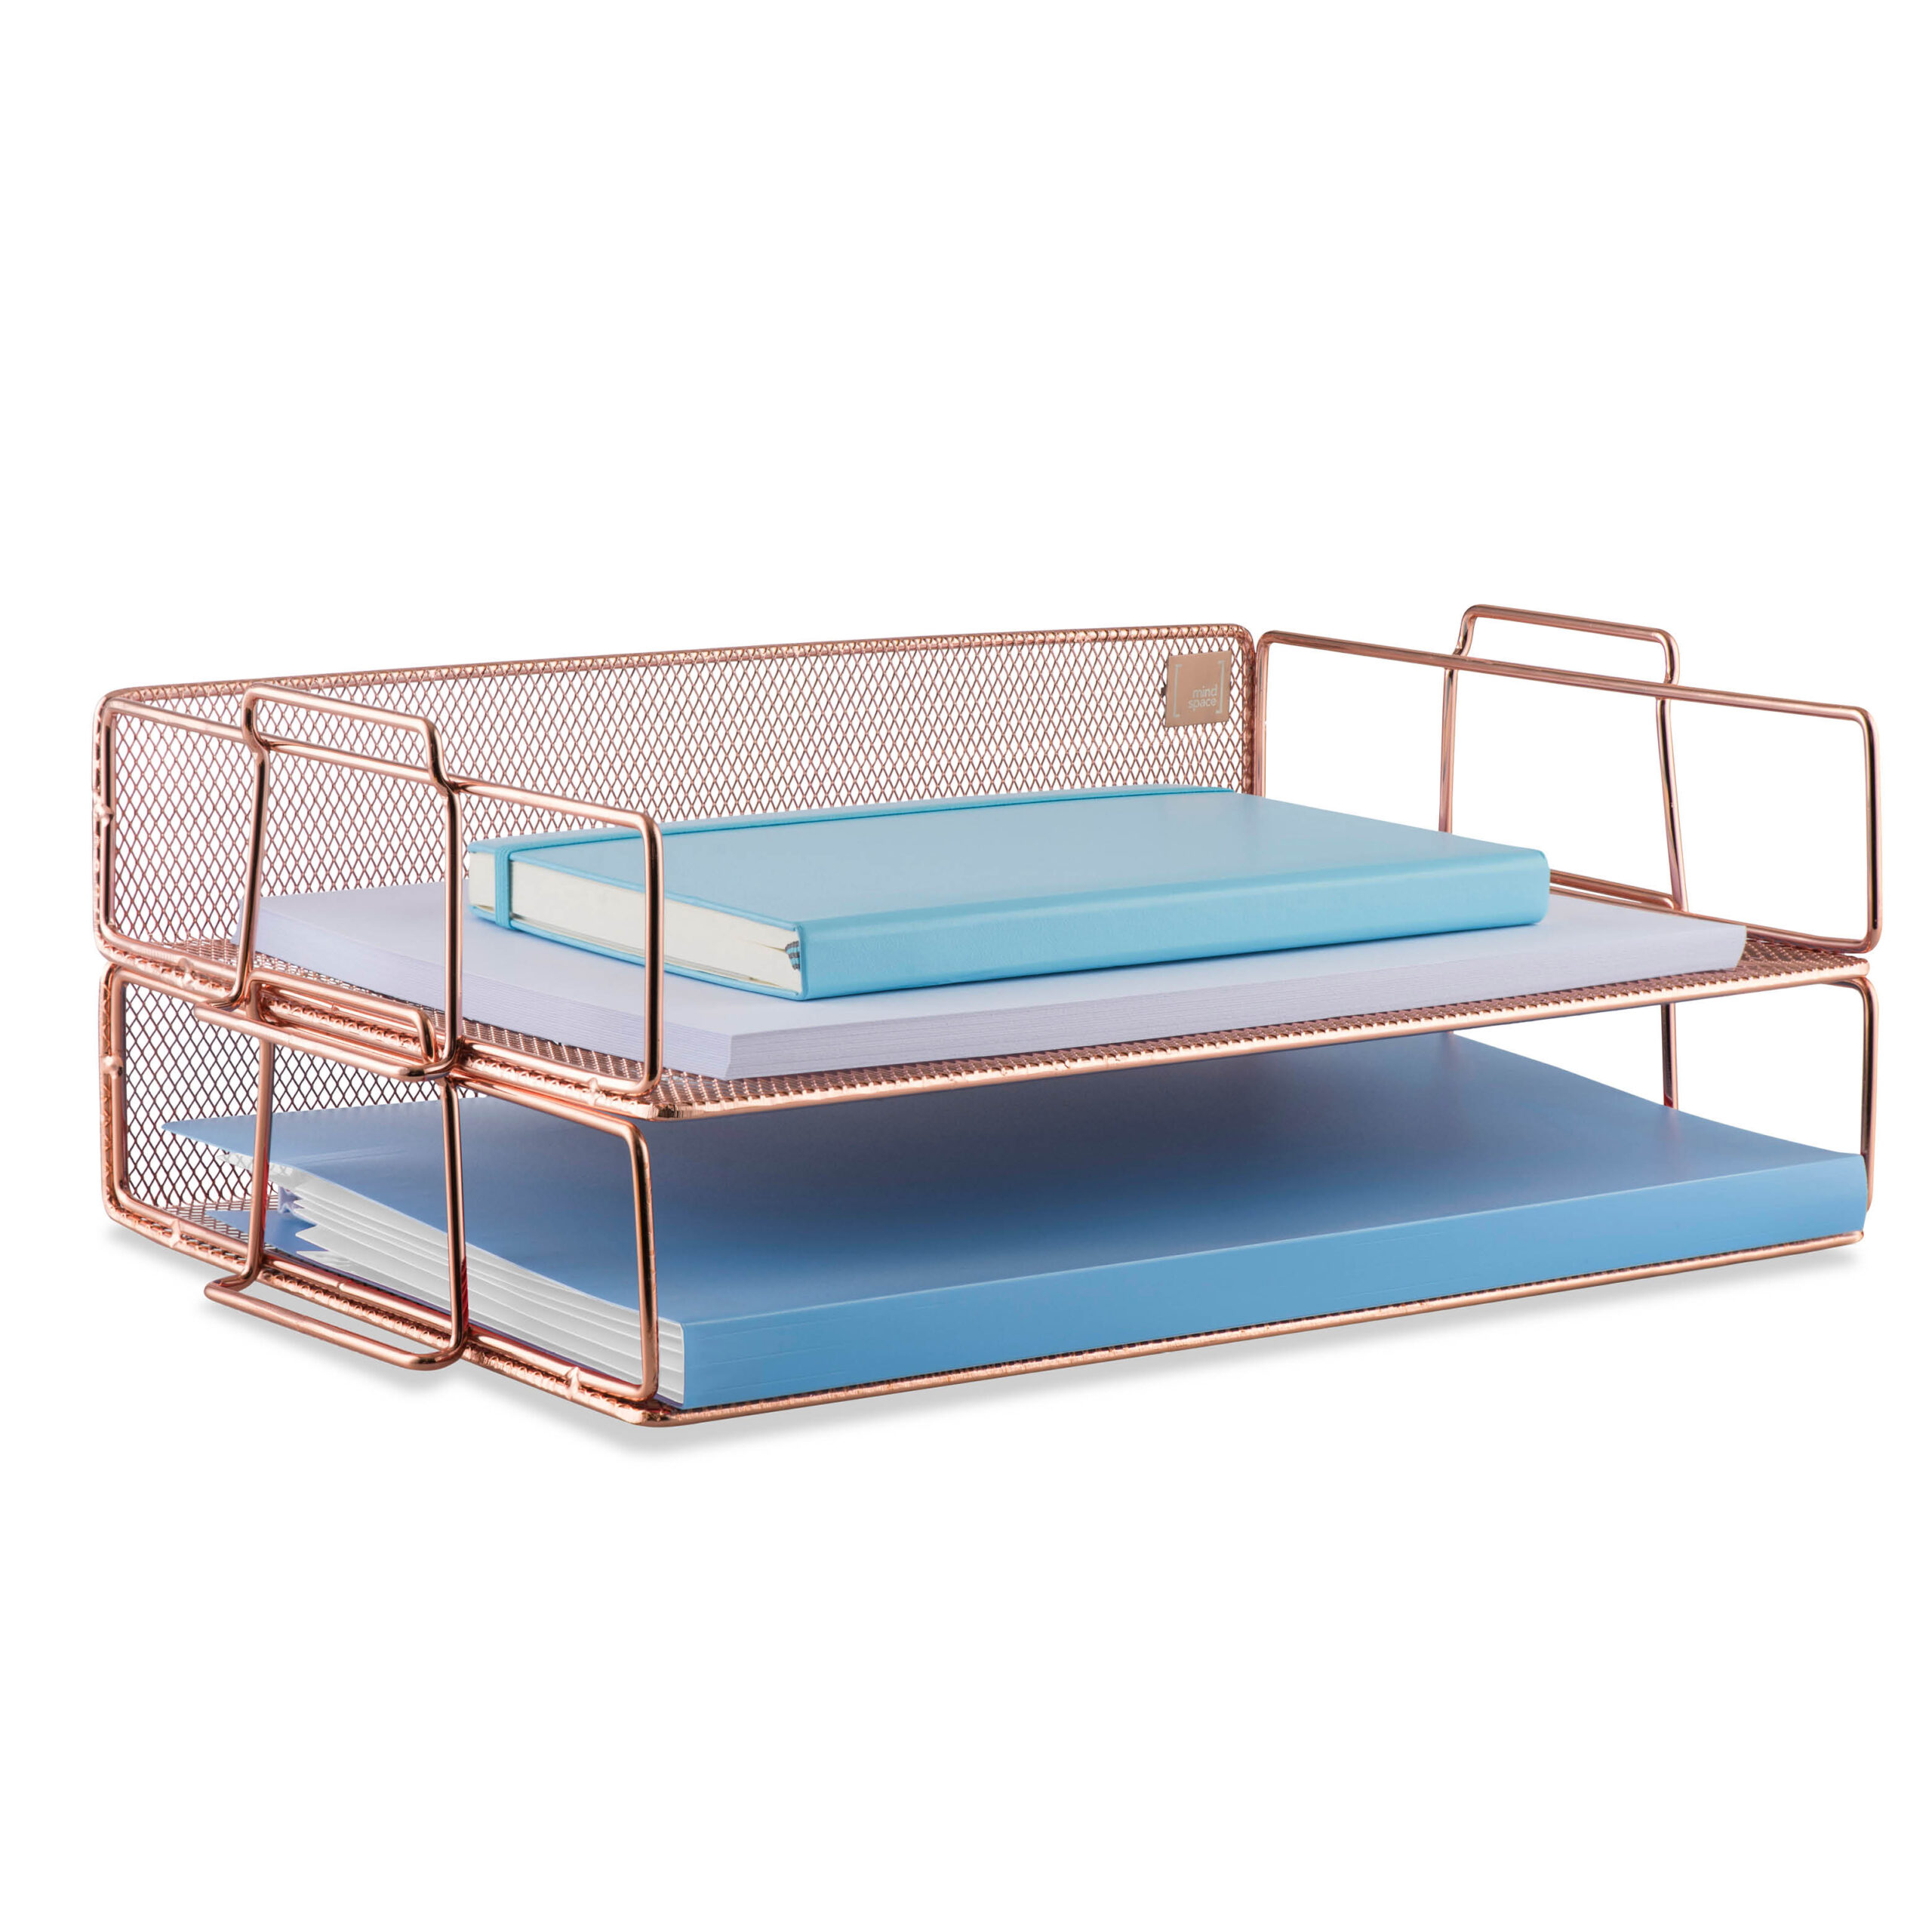 https://www.mindspaceny.com/wp-content/uploads/2020/12/2-Tier-Stackable-Tray-Rose-Gold-scaled.jpg